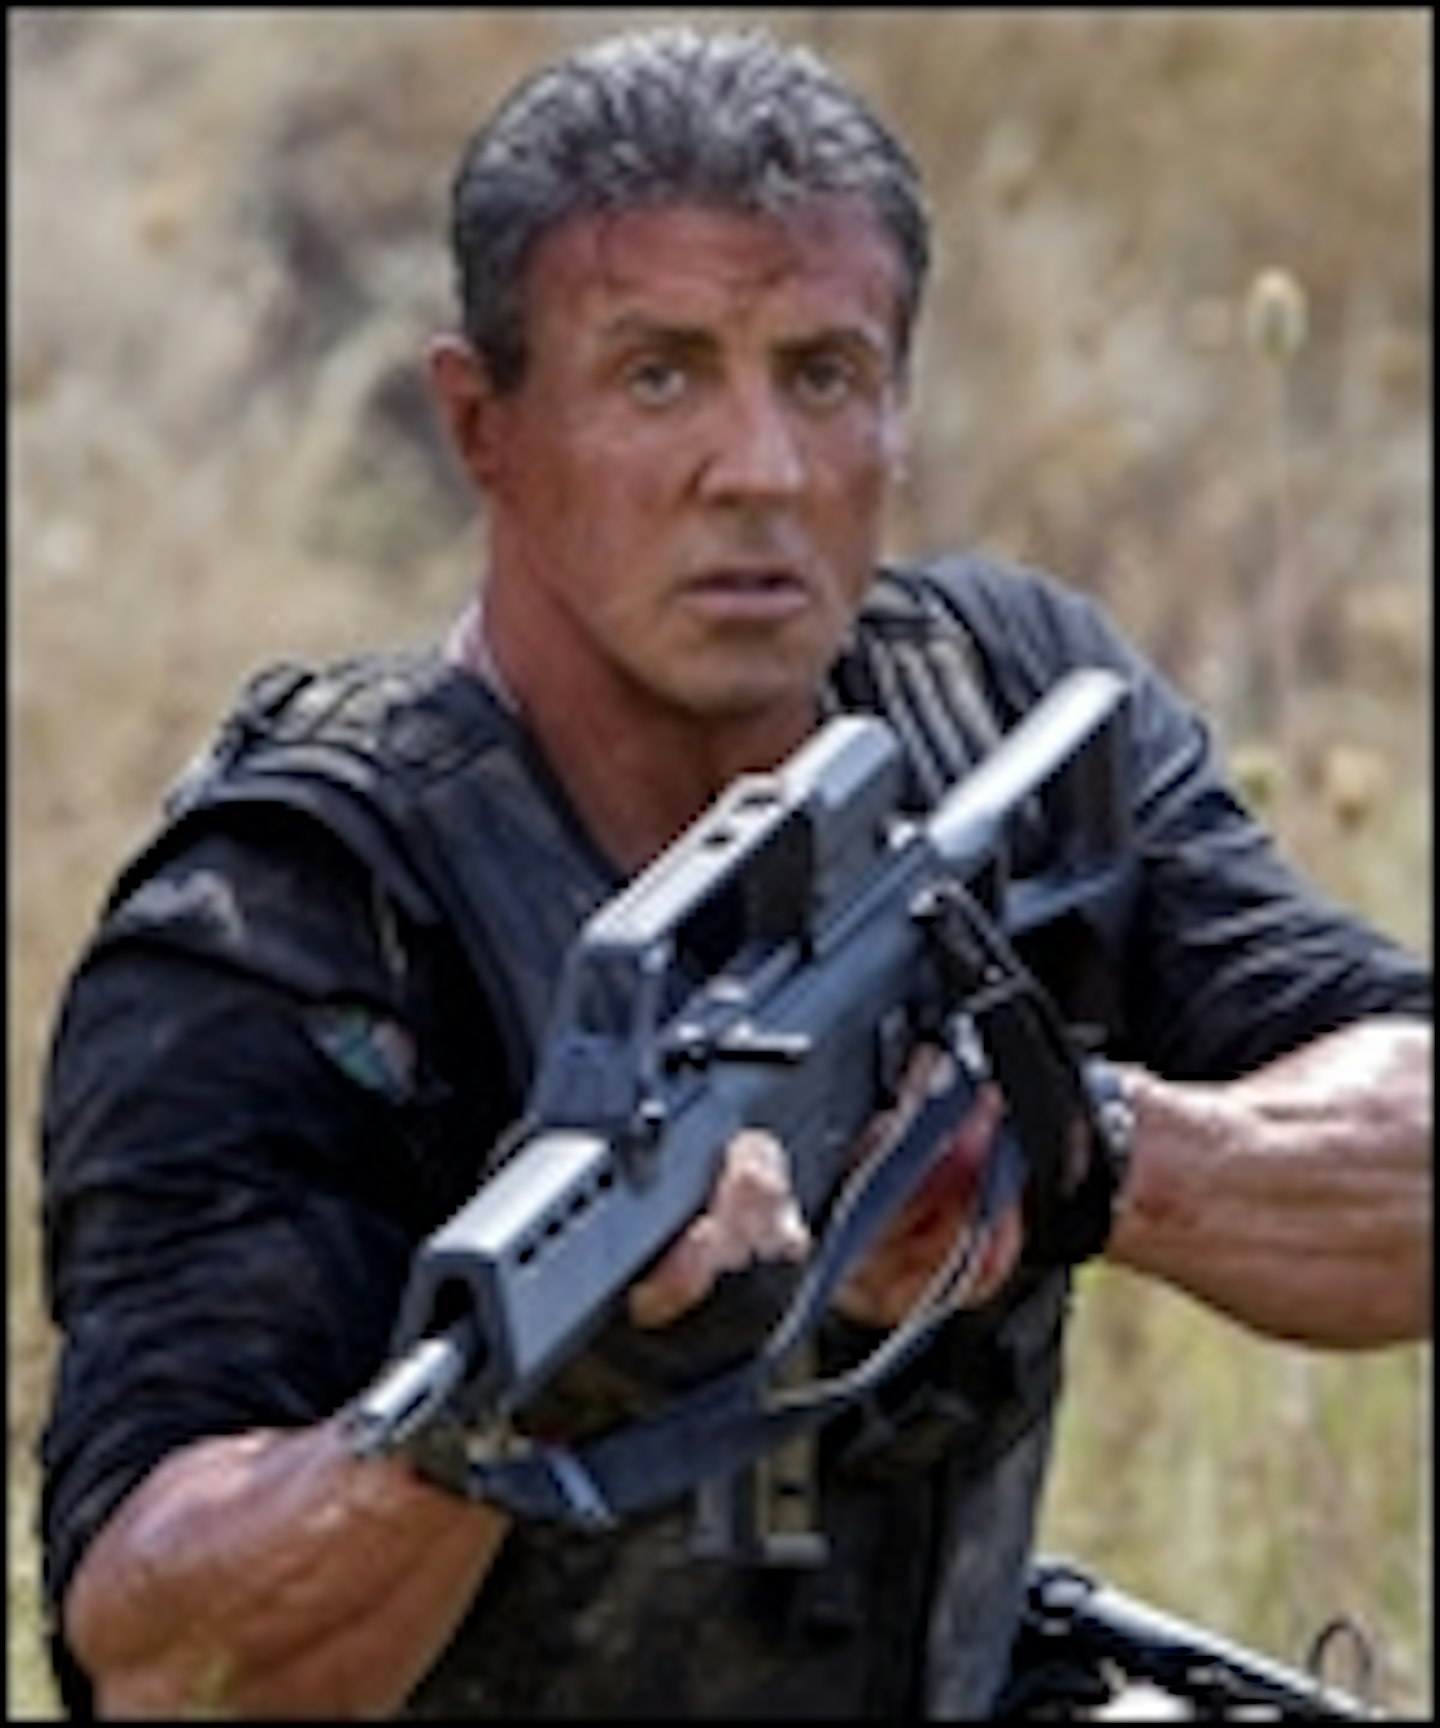 Latest Expendables 3 Trailer Explodes Online